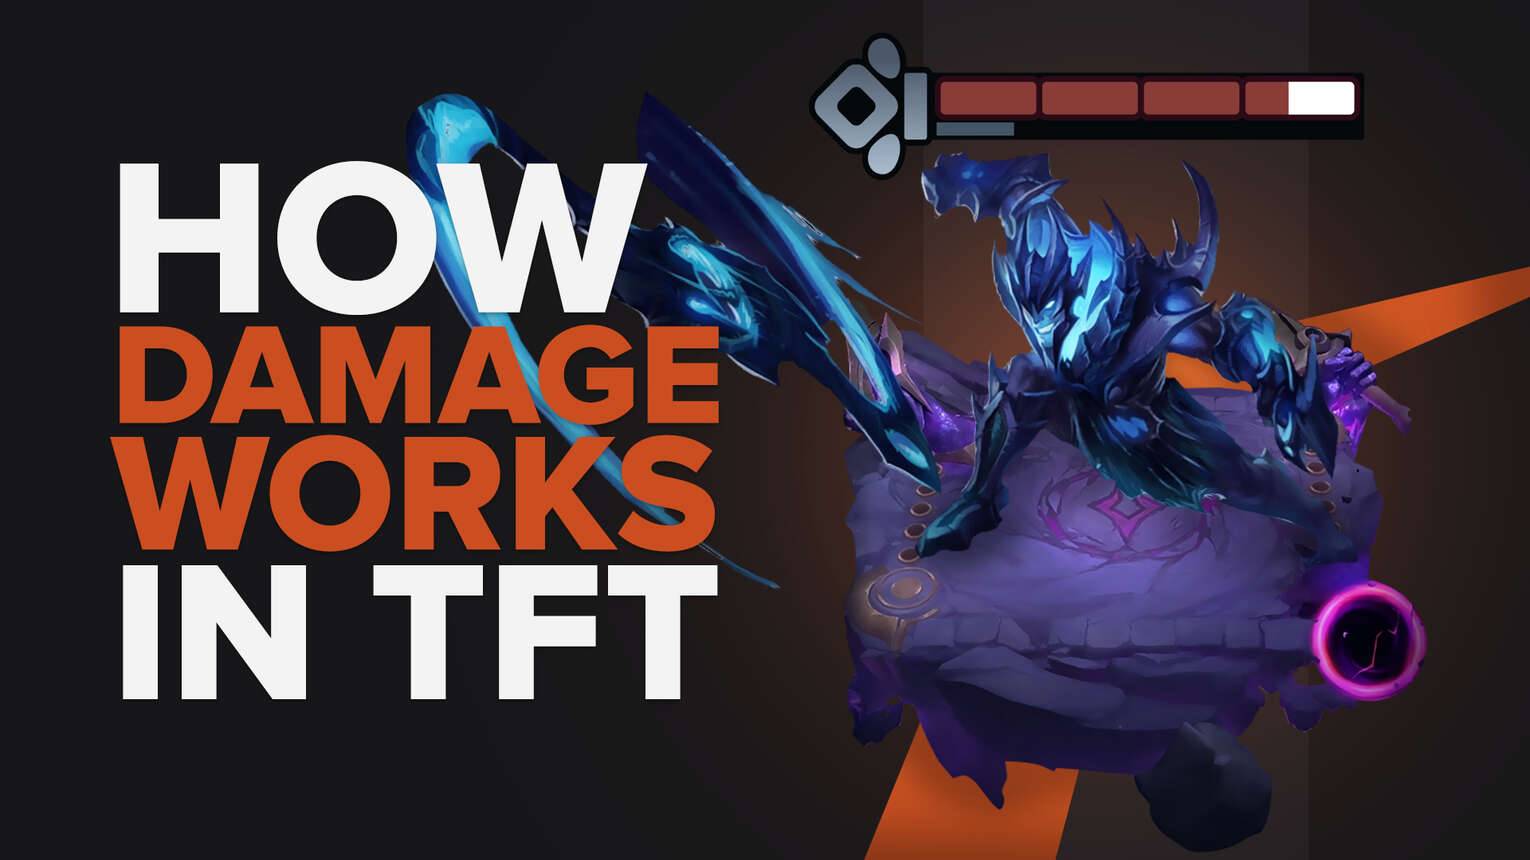 All About How Damage Works in Teamfight Tactics [In-Depth]